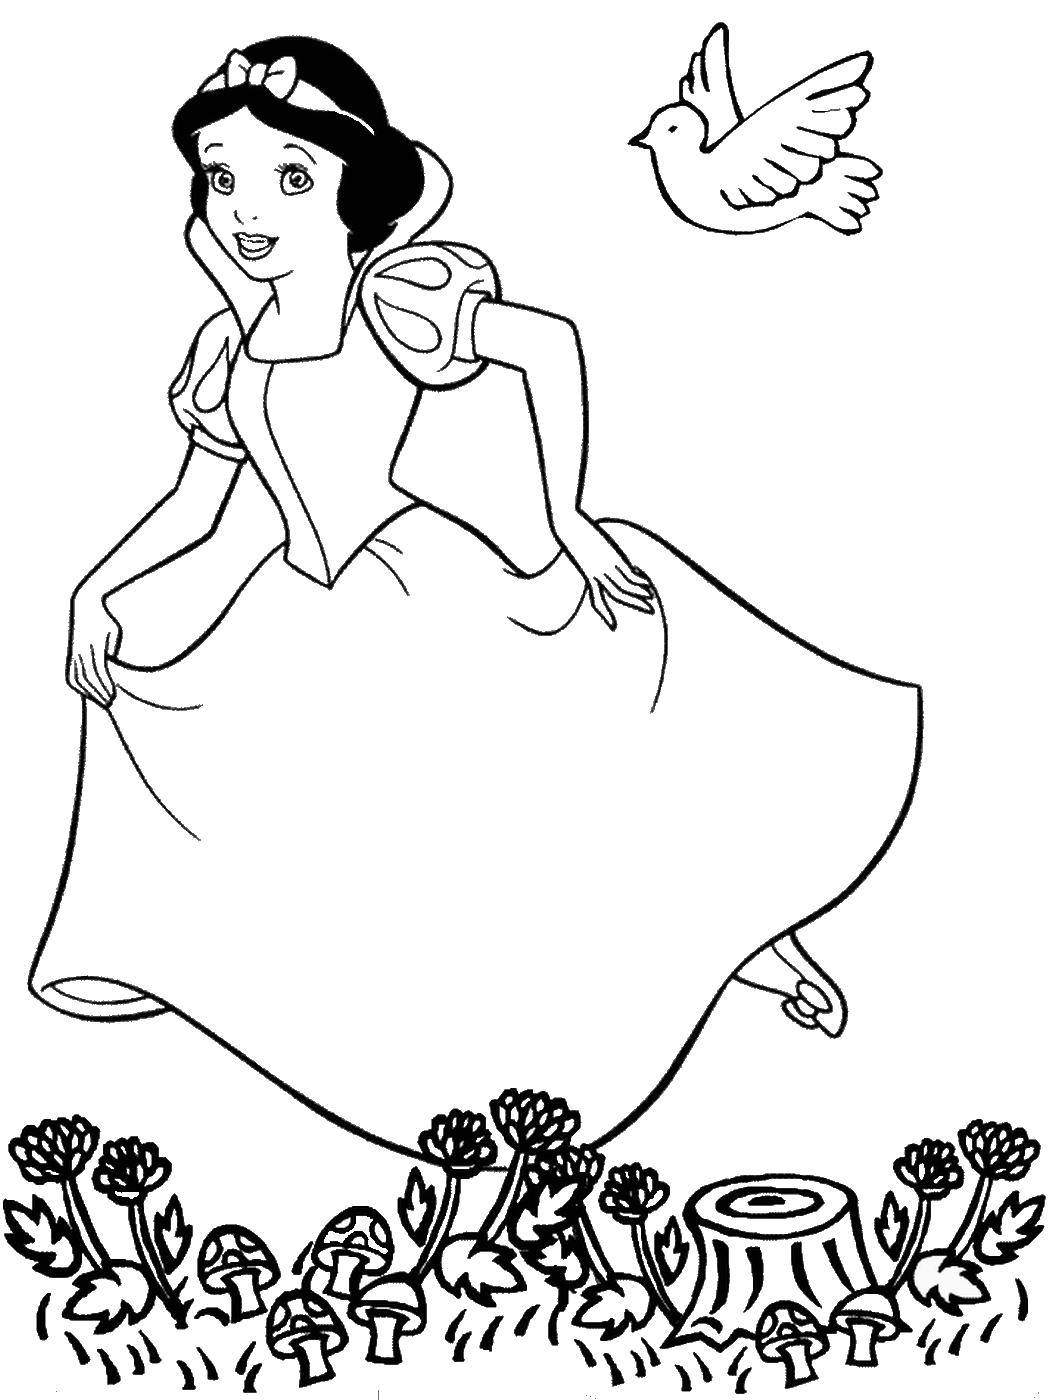 Snow White Coloring Pages Cartoons snow_white_cl_56 Printable 2020 5740 Coloring4free